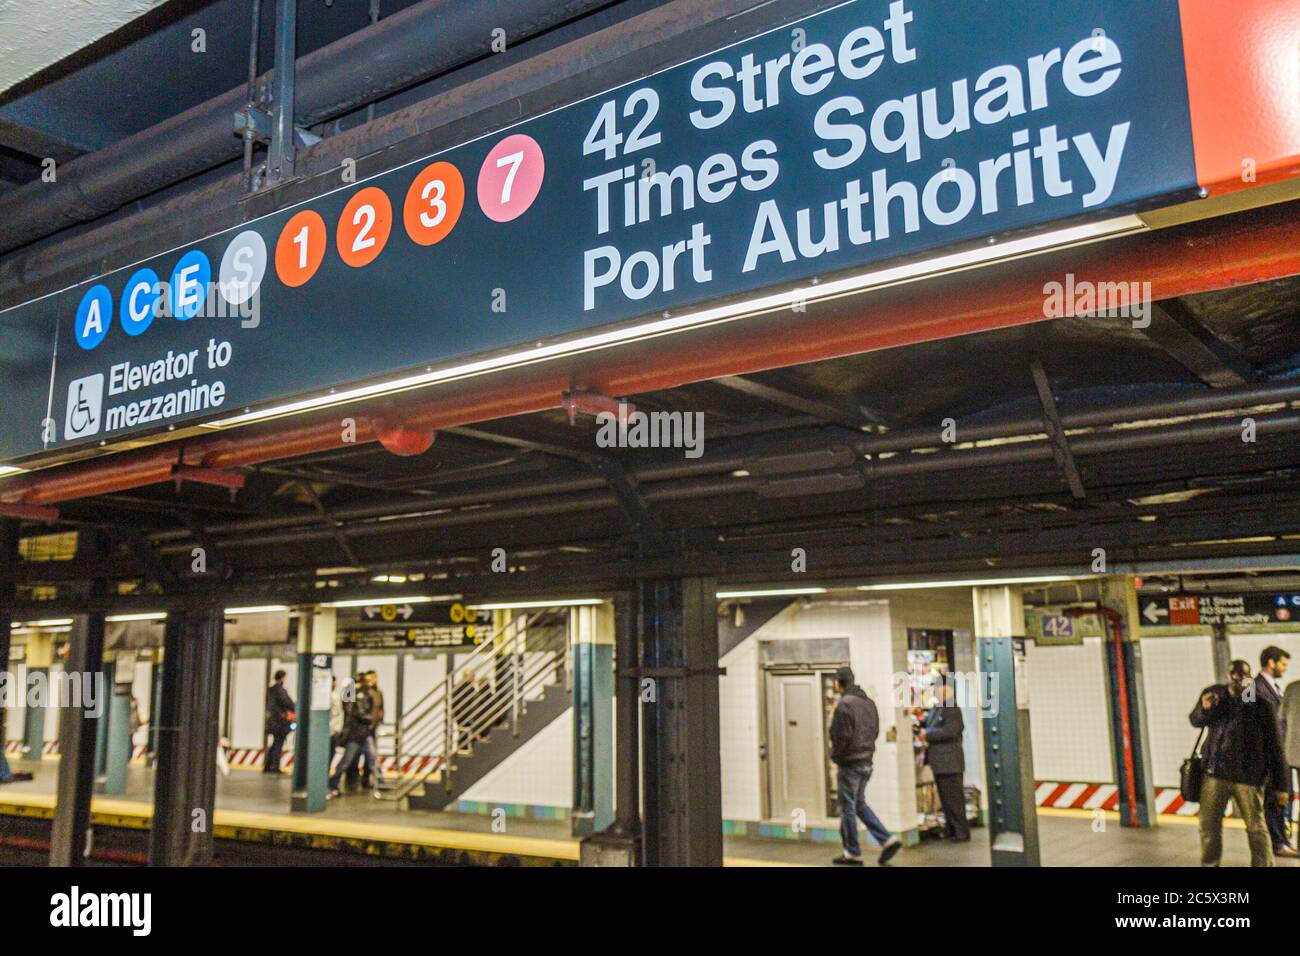 New York City,NYC NY Manhattan,Midtown,MTA,New York City,Subway system,Times Square Station,Port Authority,A C E S 1 2 3 7 highway Route,platform,comm Stock Photo